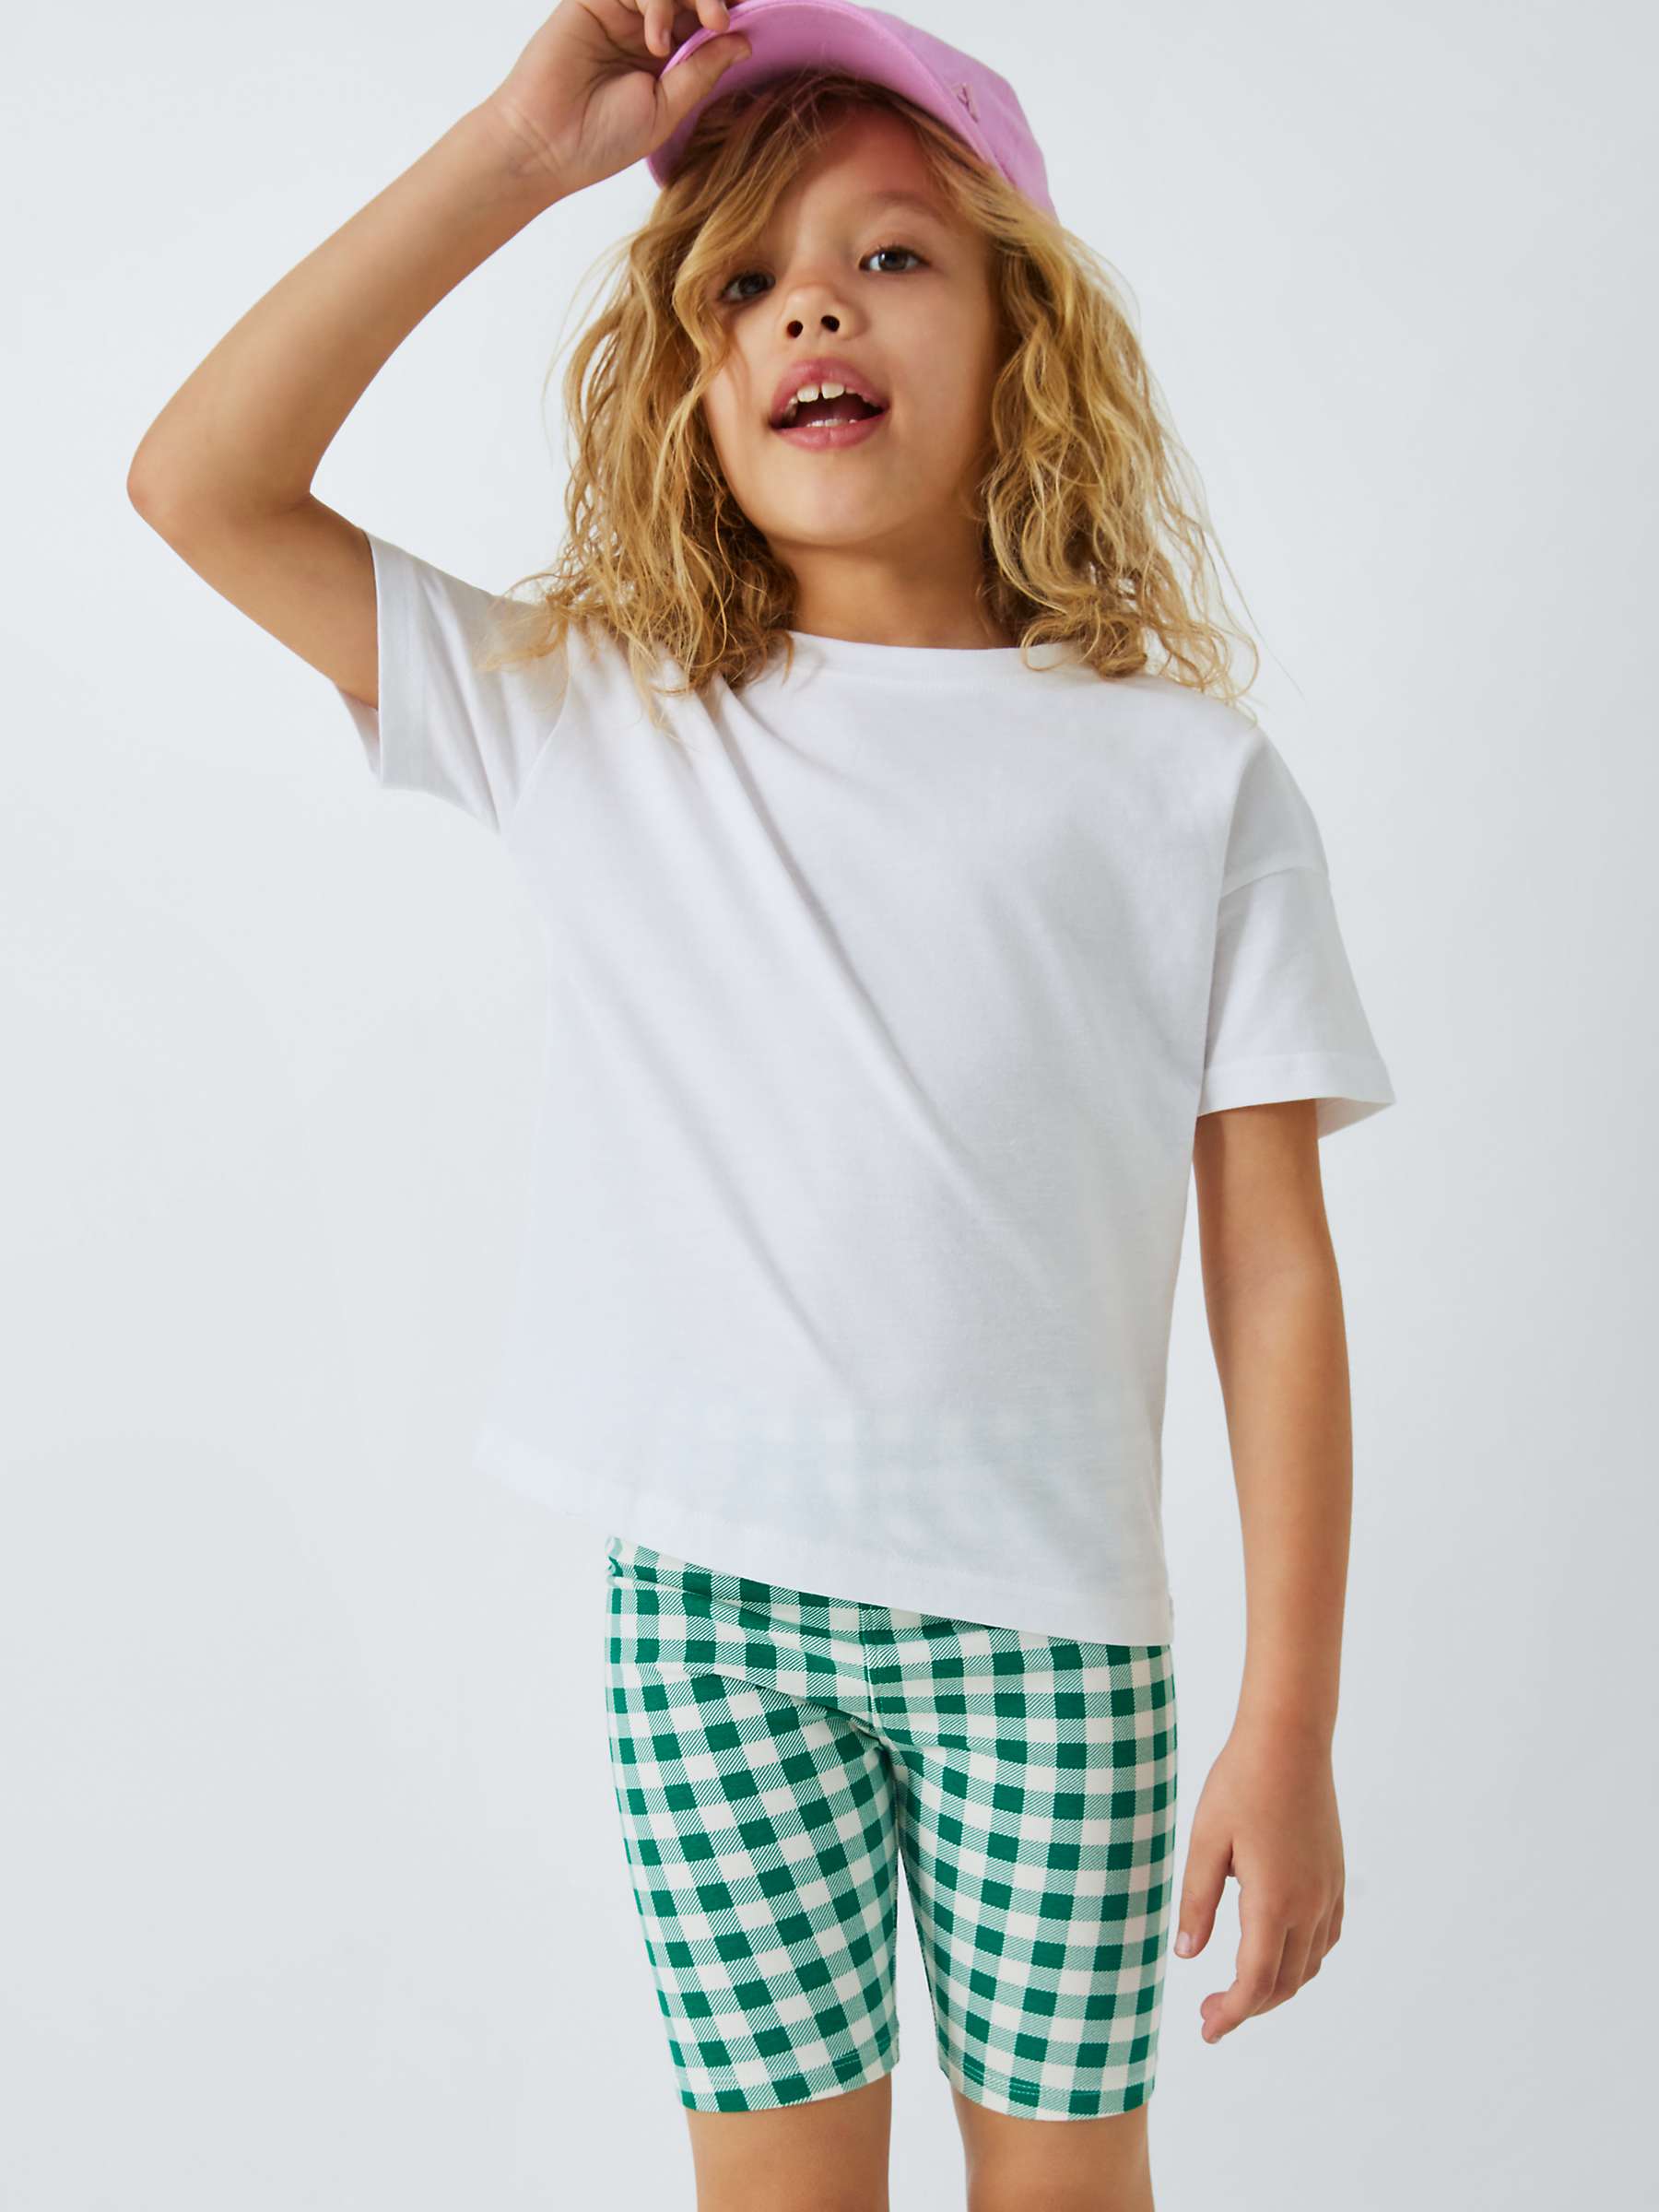 Buy John Lewis ANYDAY Kids' Gingham Cycle Shorts, Lush Meadow Online at johnlewis.com